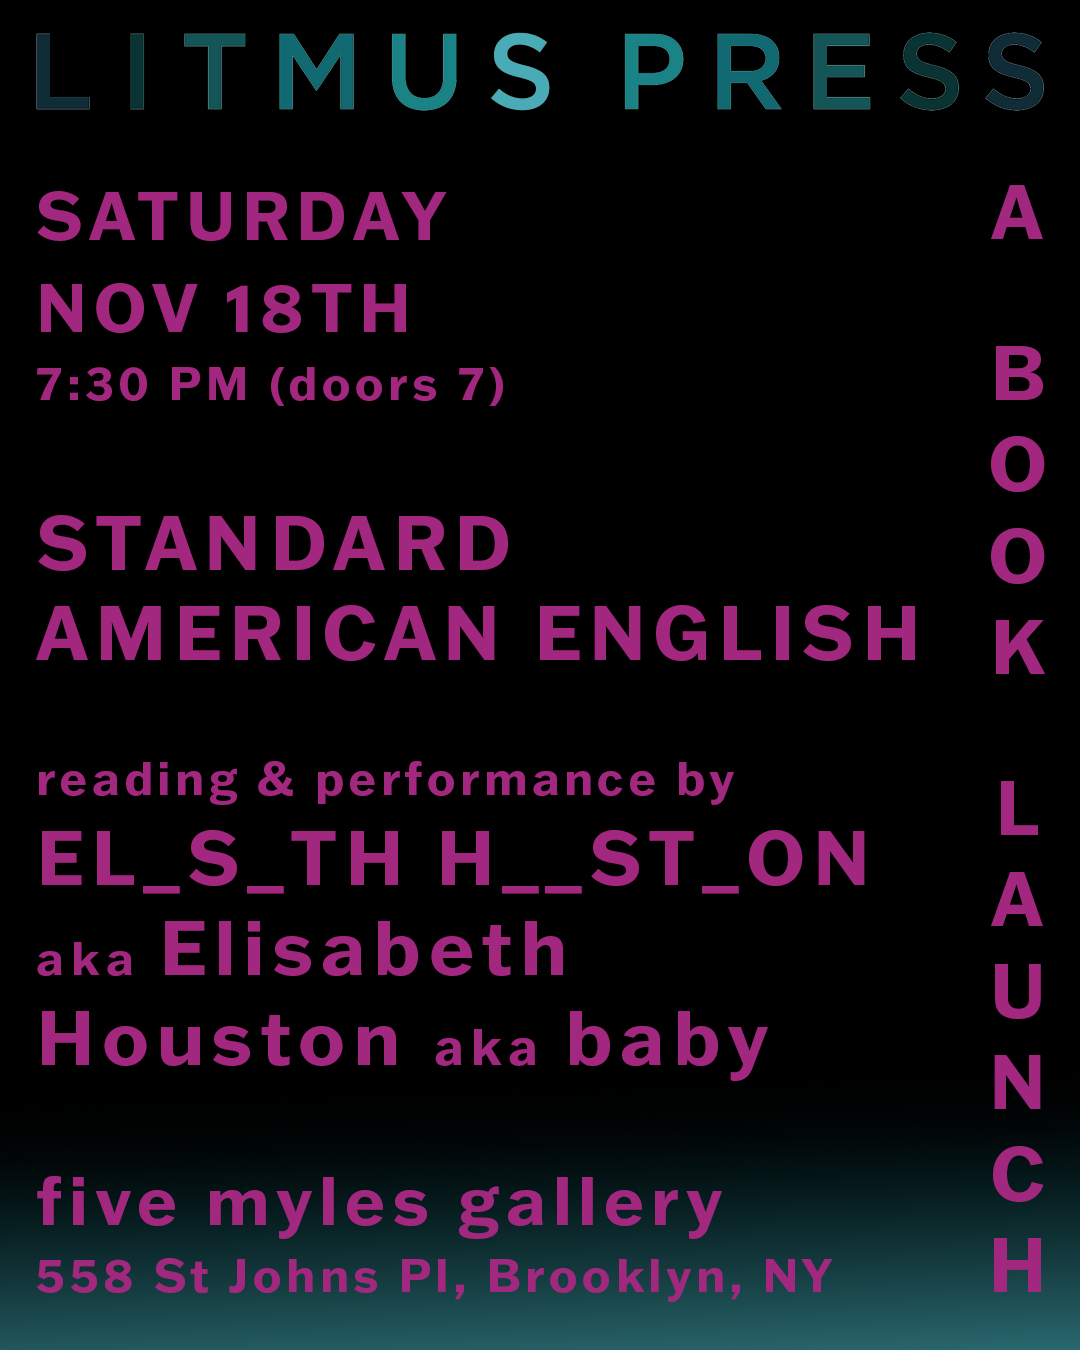 Standard American English book launch flyer black background with pink text describing basic details of when where and what that are also delivered in this blog post